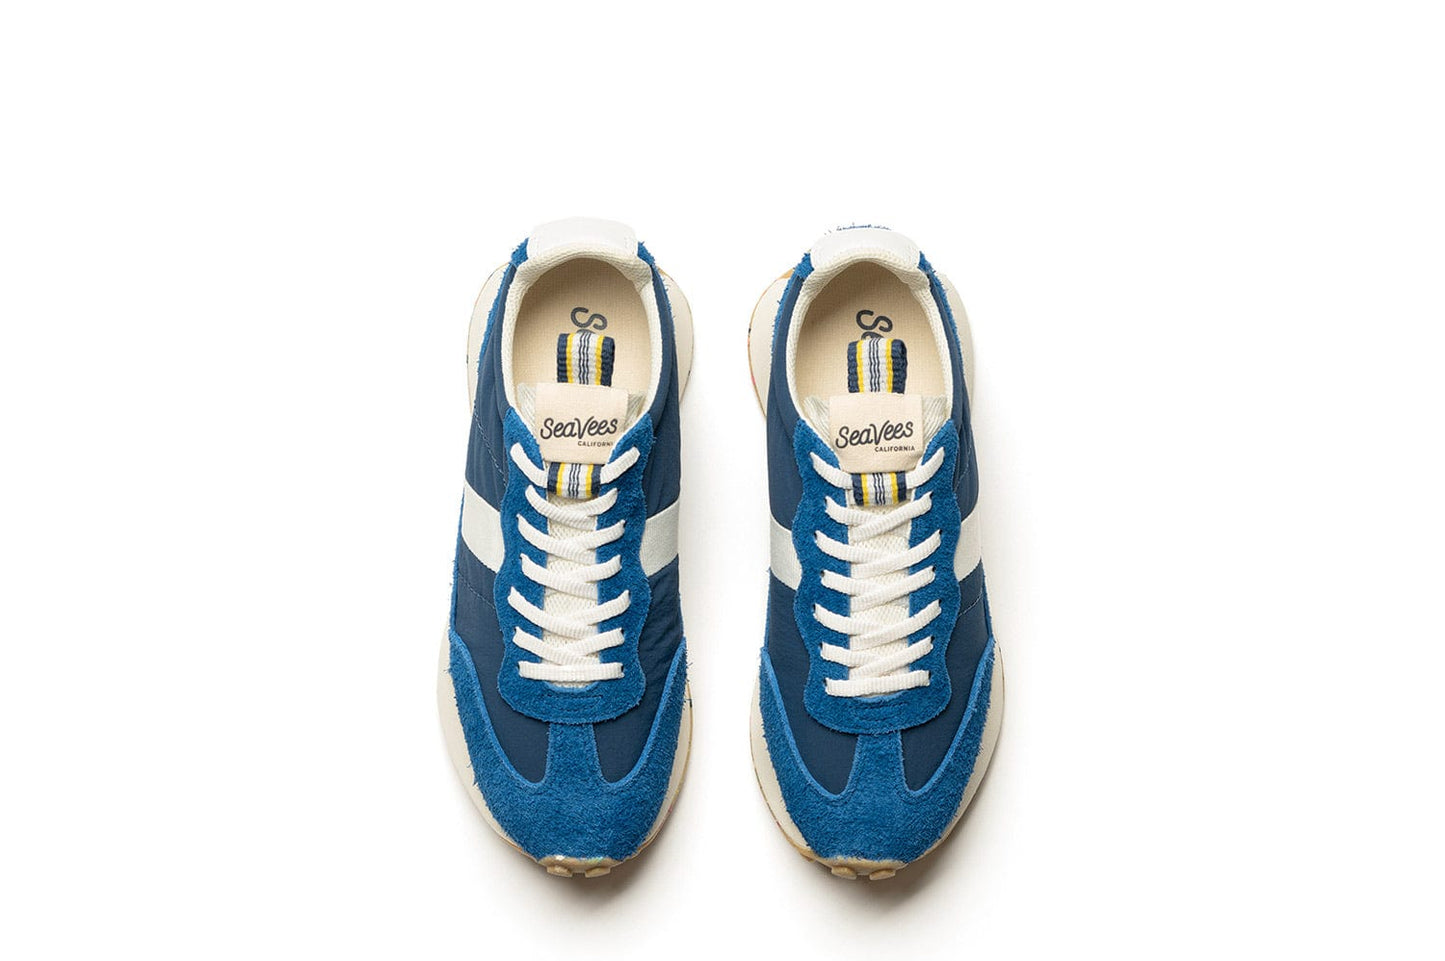 Top-down view of the Acorn Trainer in the color Varsity Blue, showcasing white laces and branding.